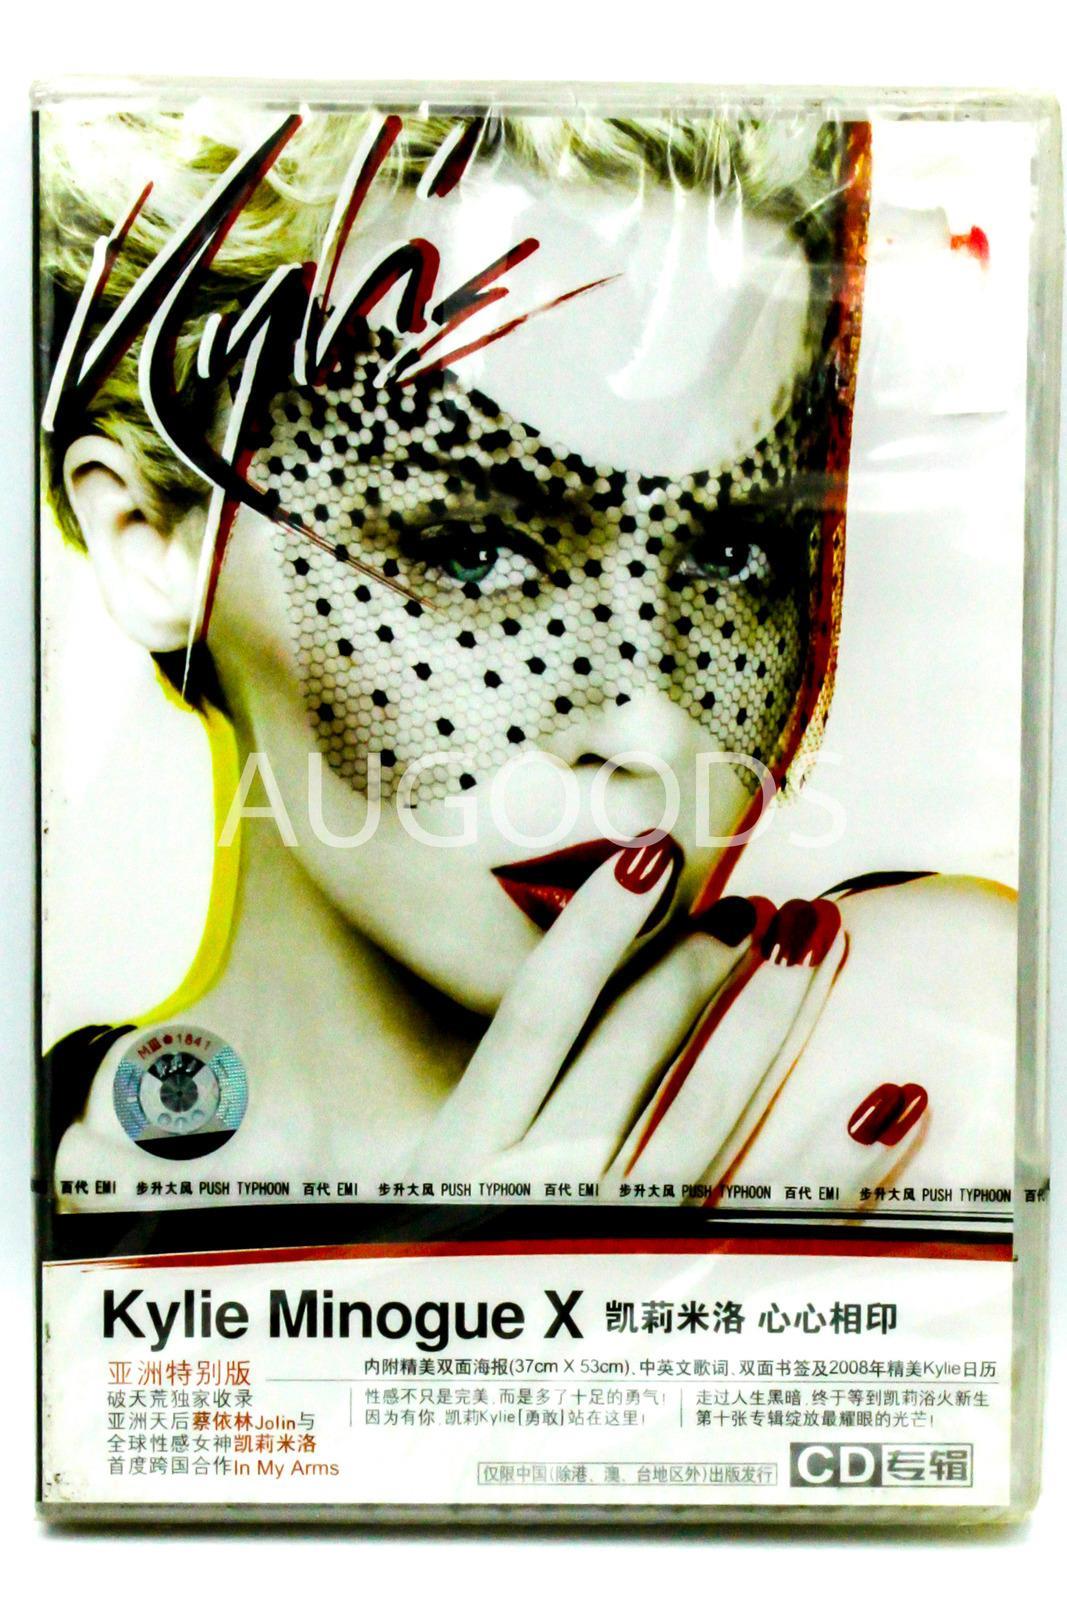 KYLIE MINOGUE X 10 TRK CD 2 HEARTS IN MY ARMS THE ONE DVD